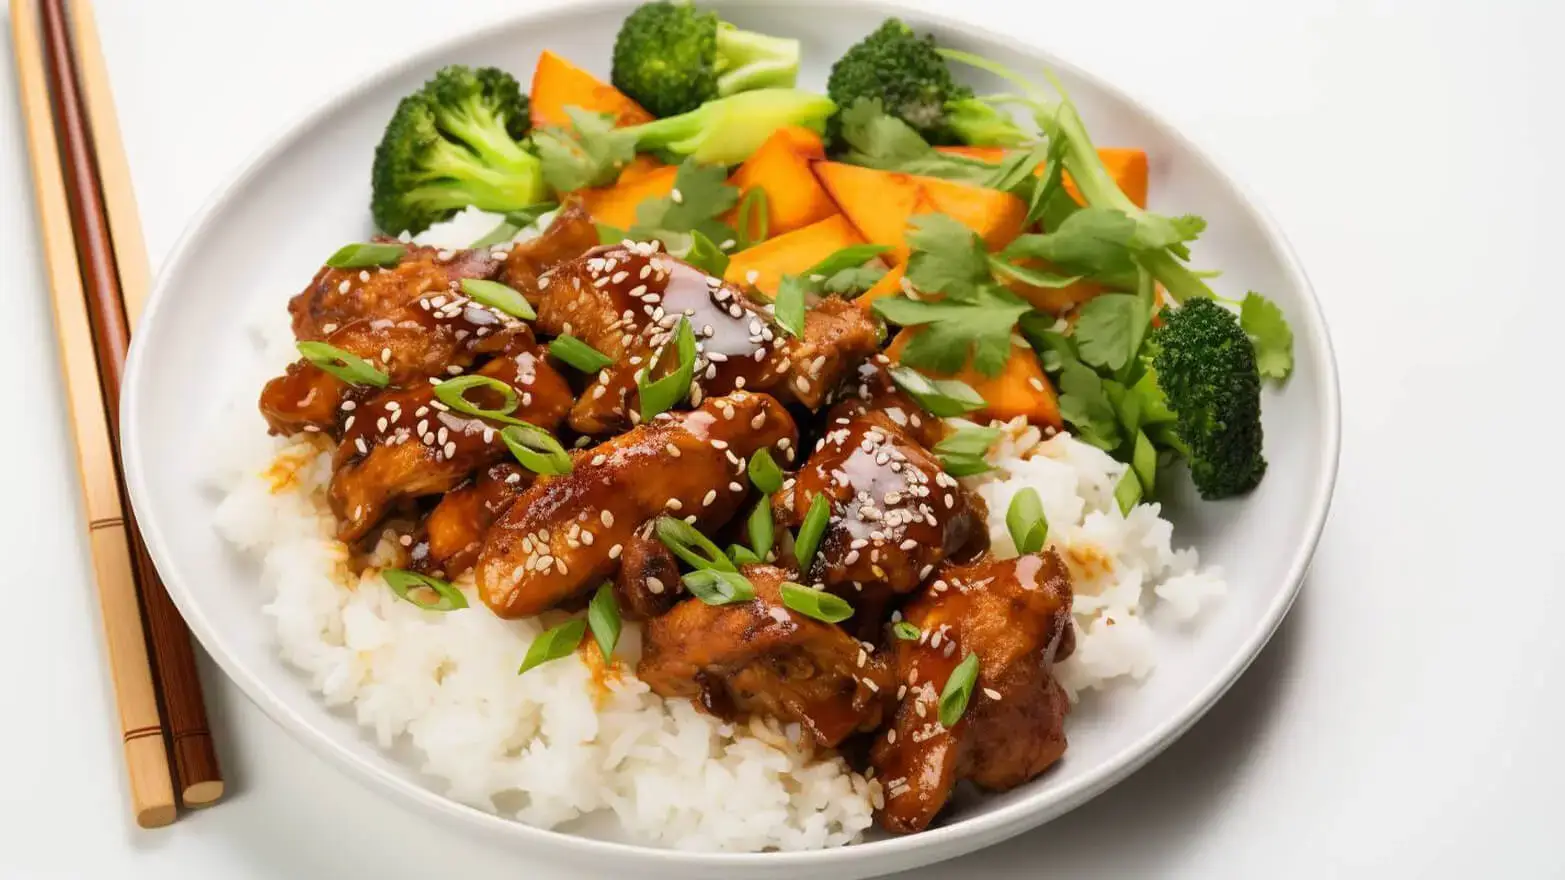 Chicken teriyaki with rice and grilled veggies